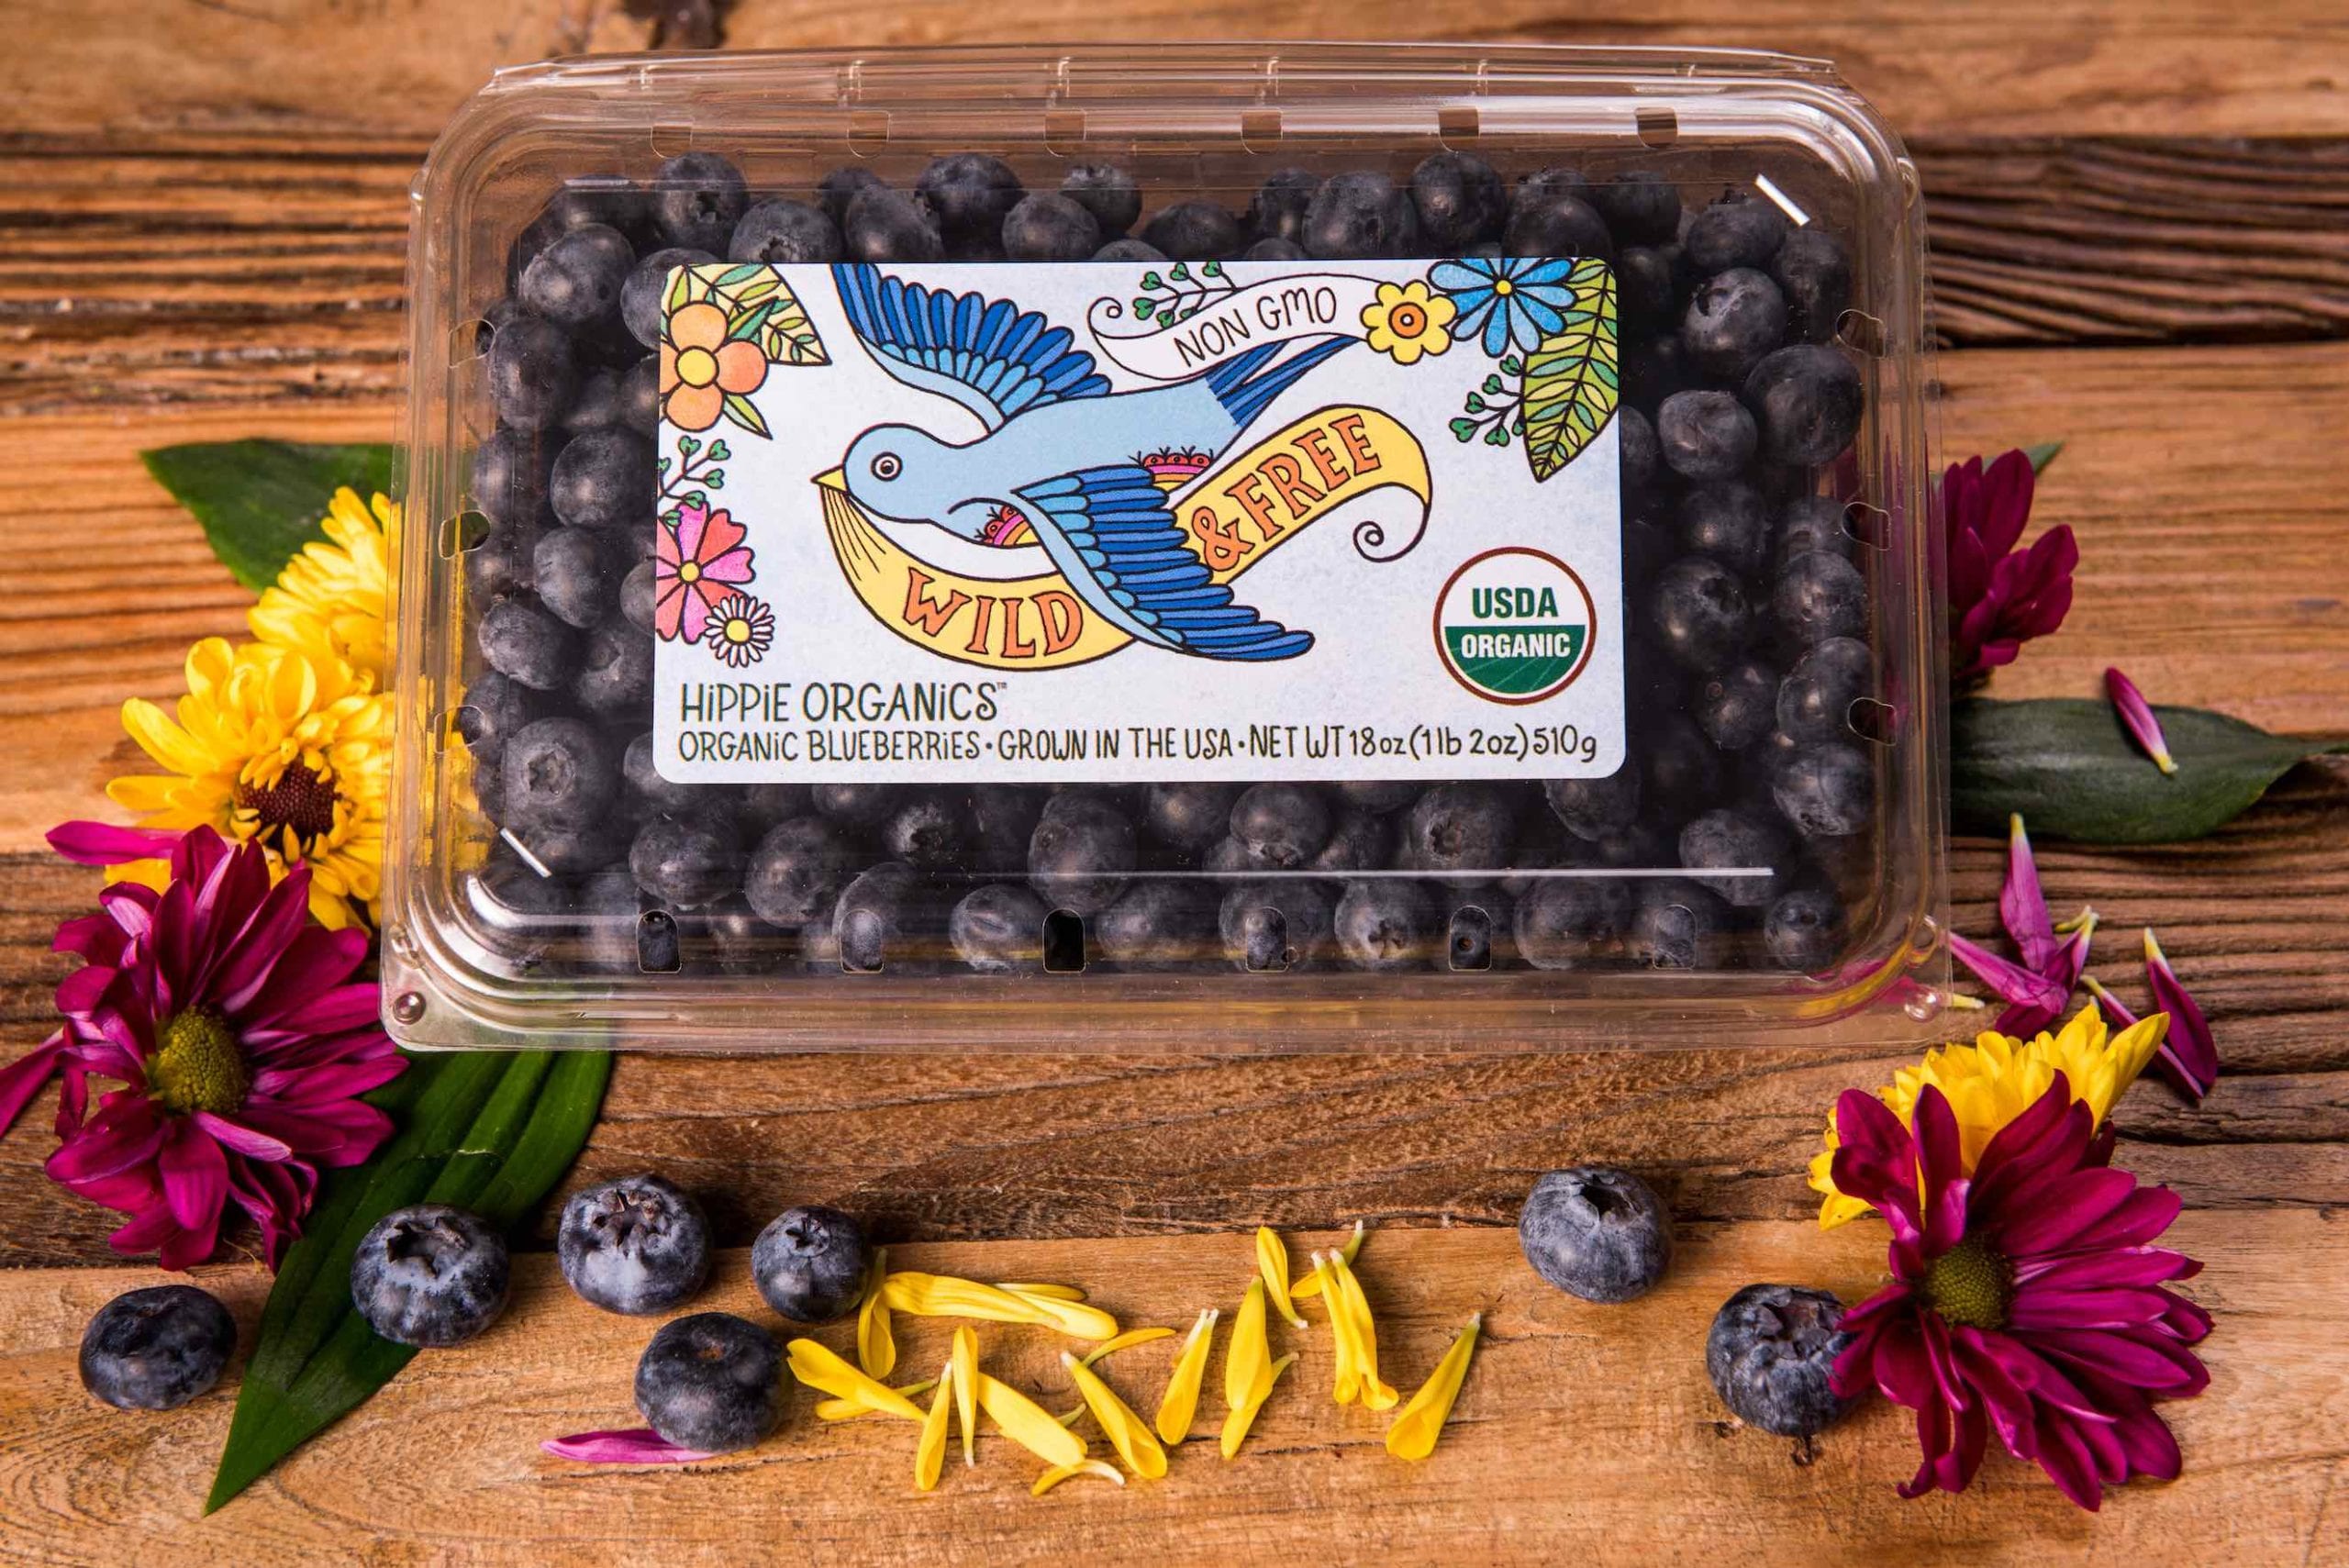 Aerial closeup view of package of organic blueberries surrounded by flowers